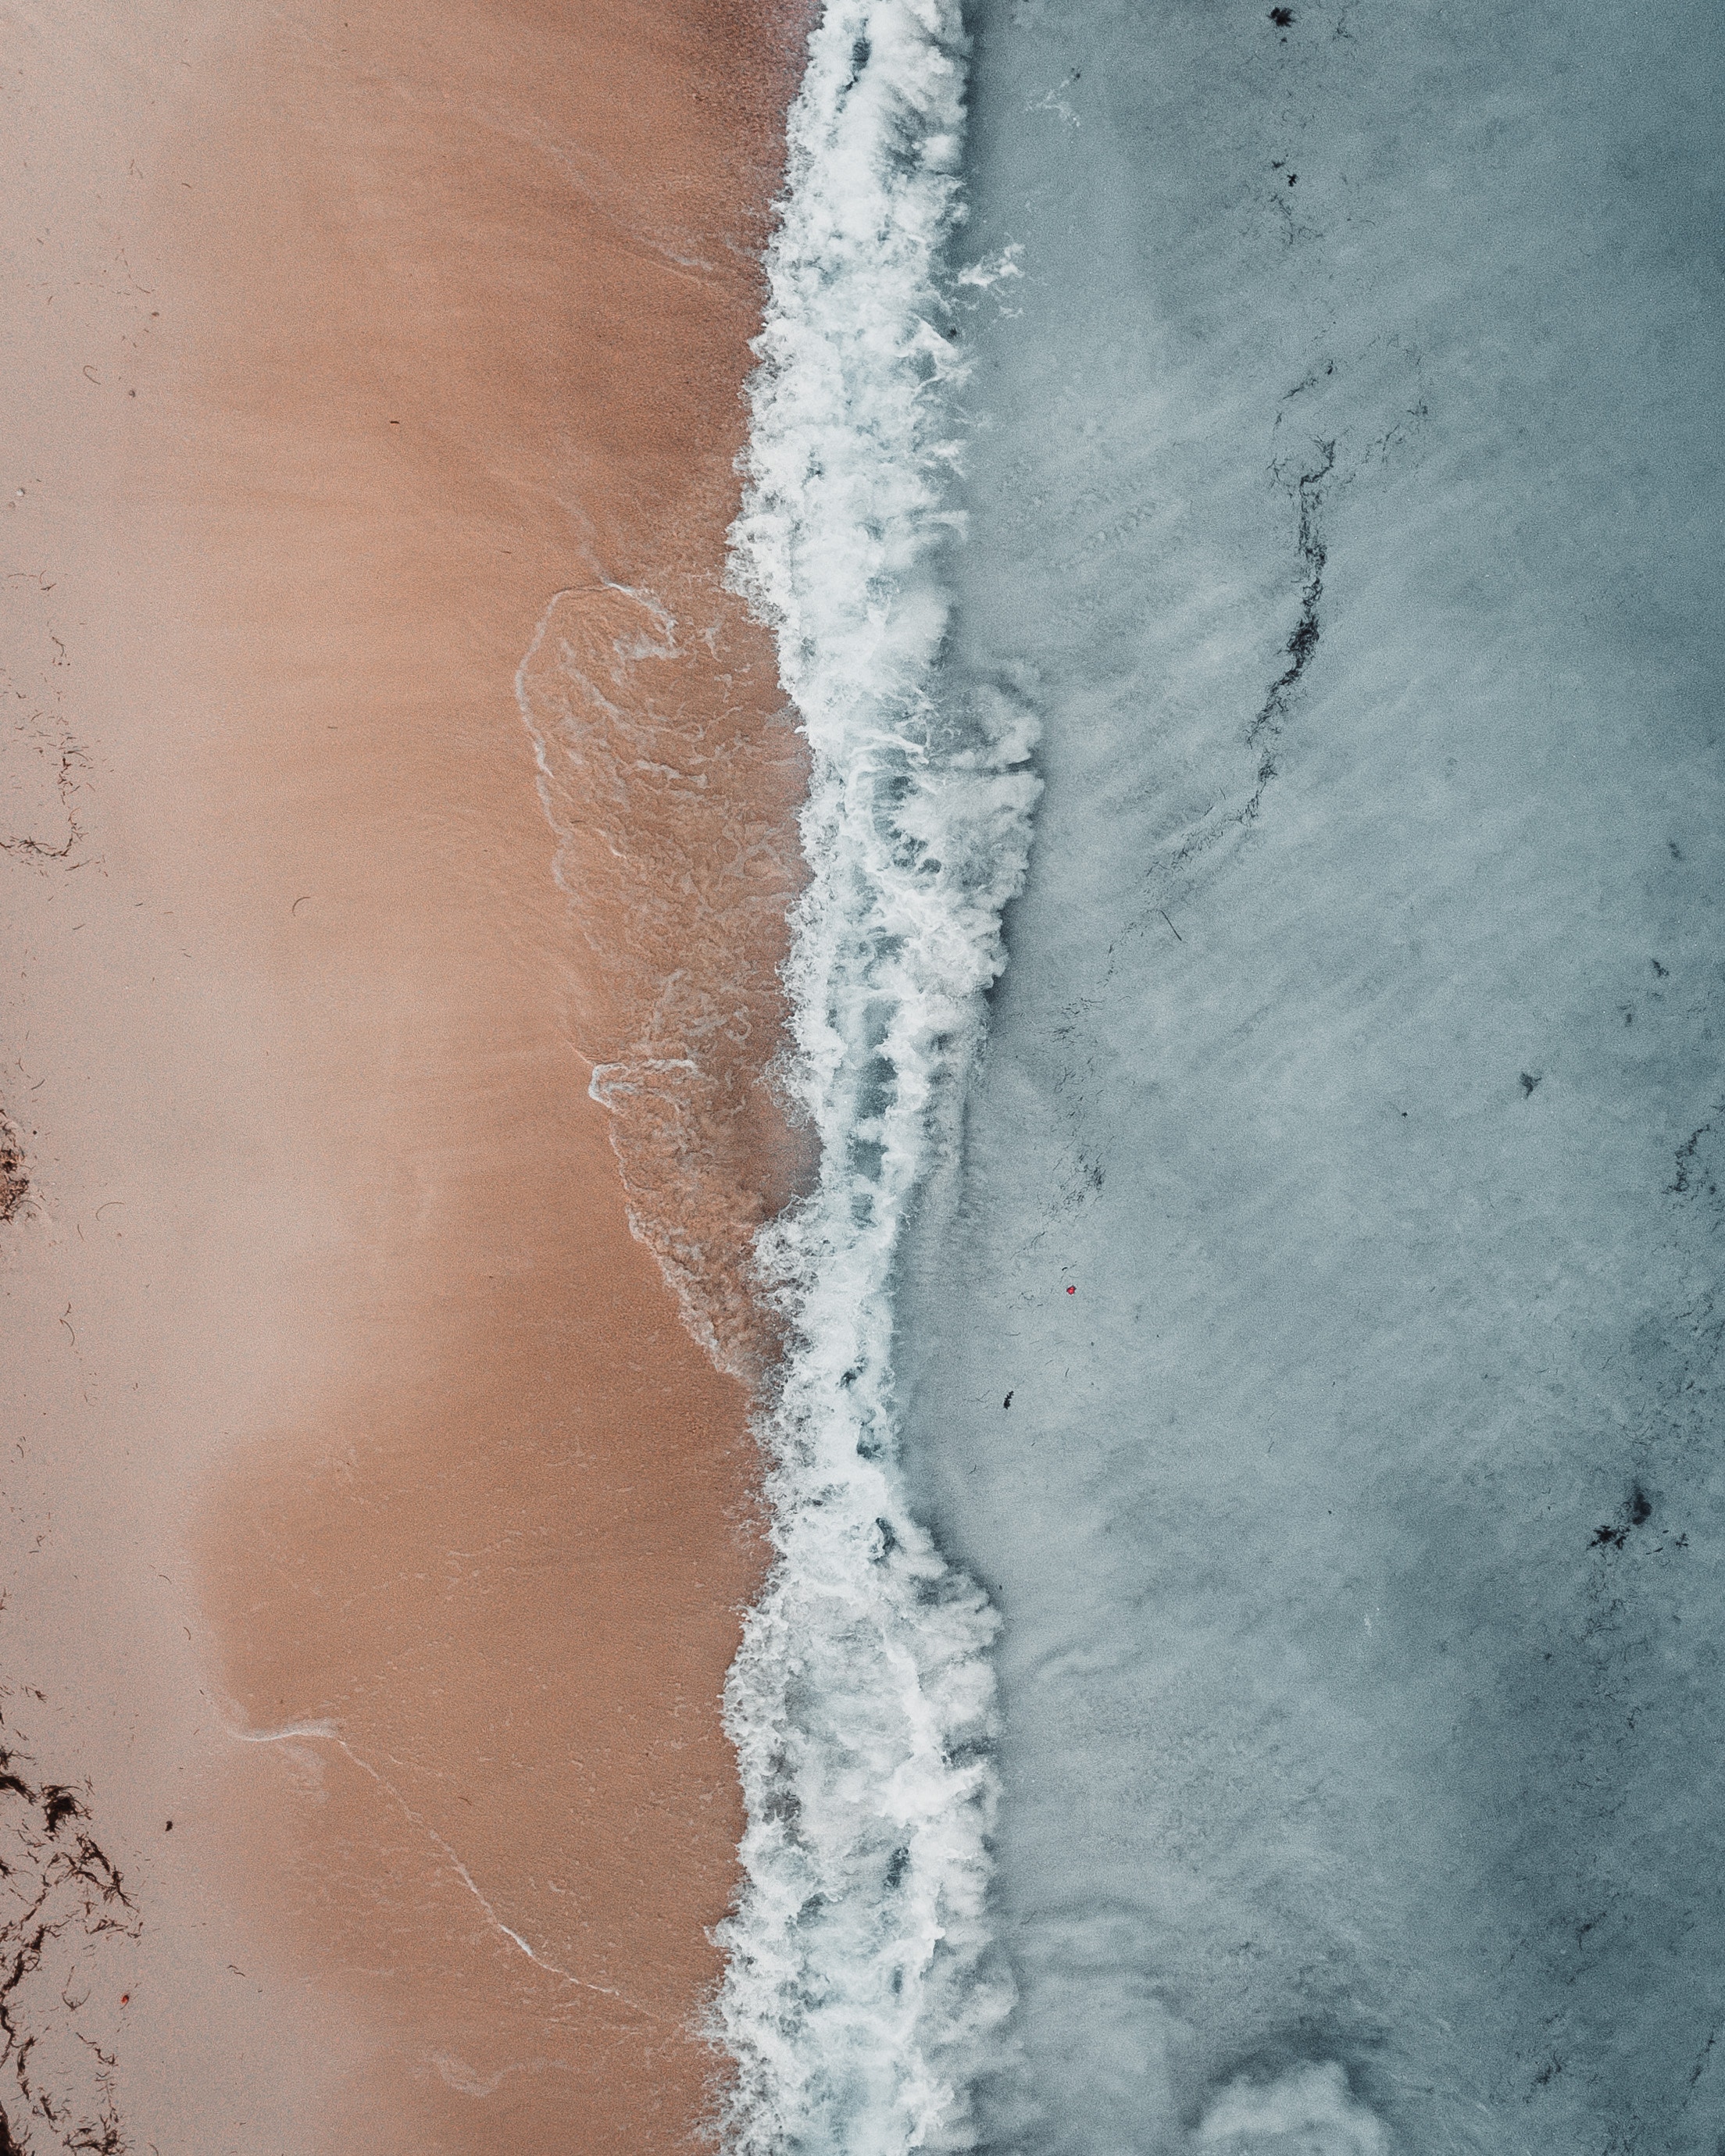 wave, view from above, nature, sand, shore, bank, ocean, surf wallpaper for mobile